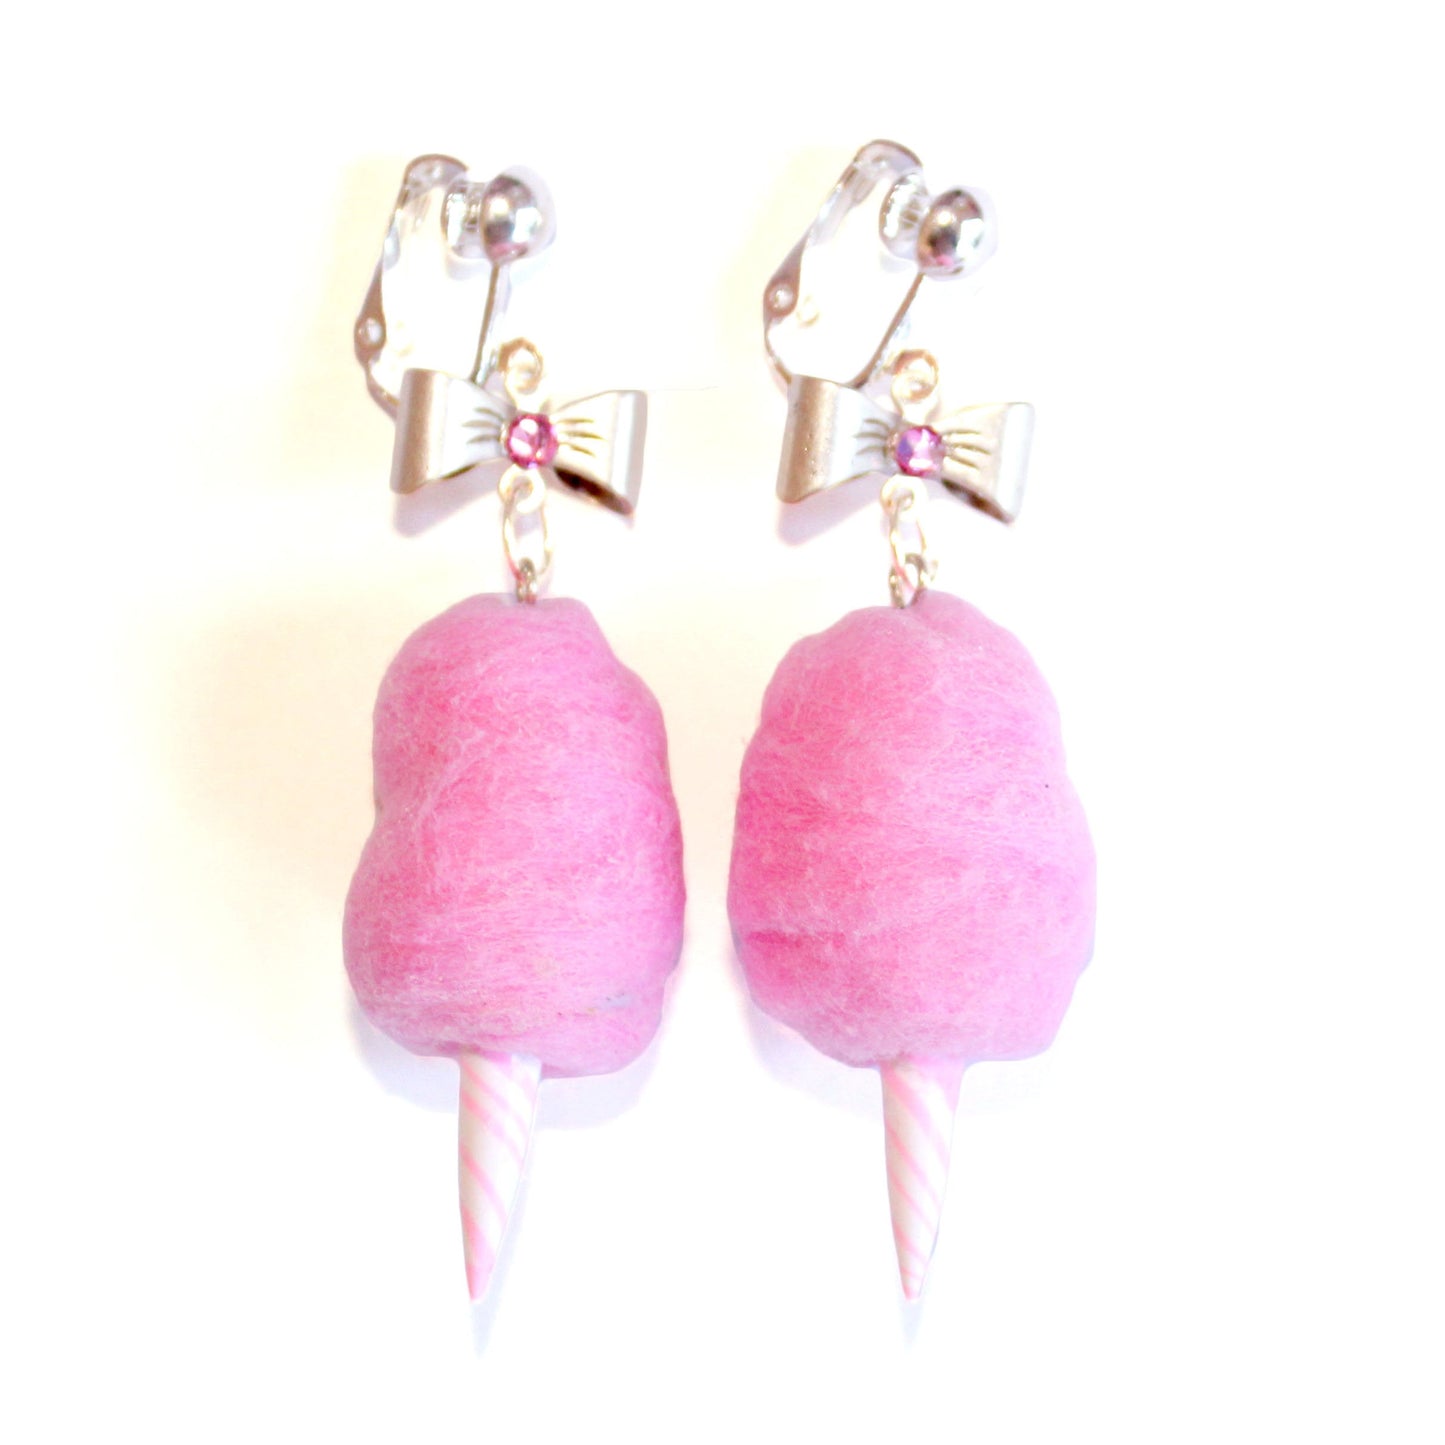 Clip-On Pink Cotton Candy Earrings - Fatally Feminine Designs